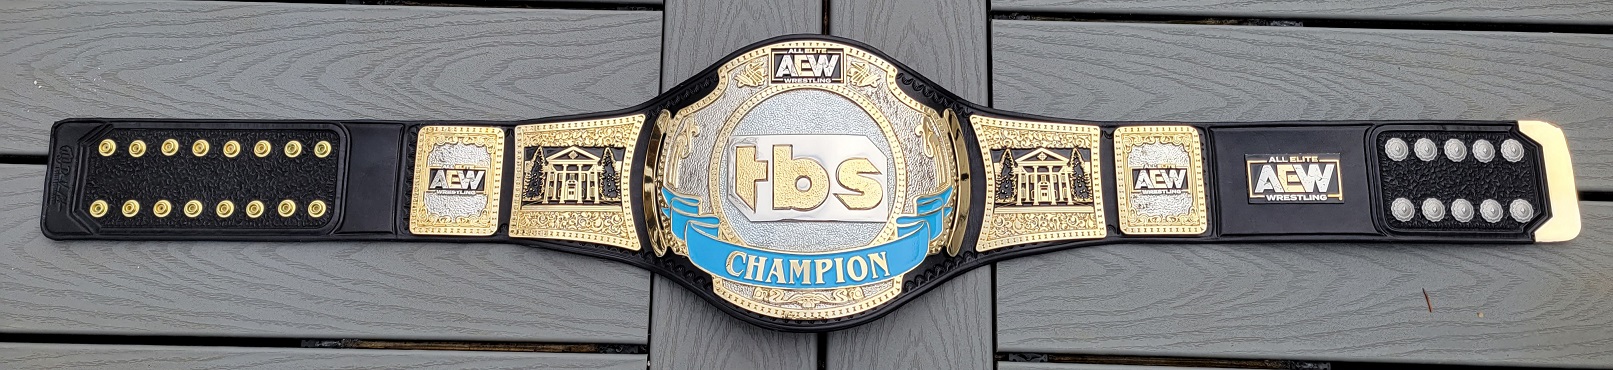 AEW TBS Championship Wrestling Belt Limited Collectors Pin